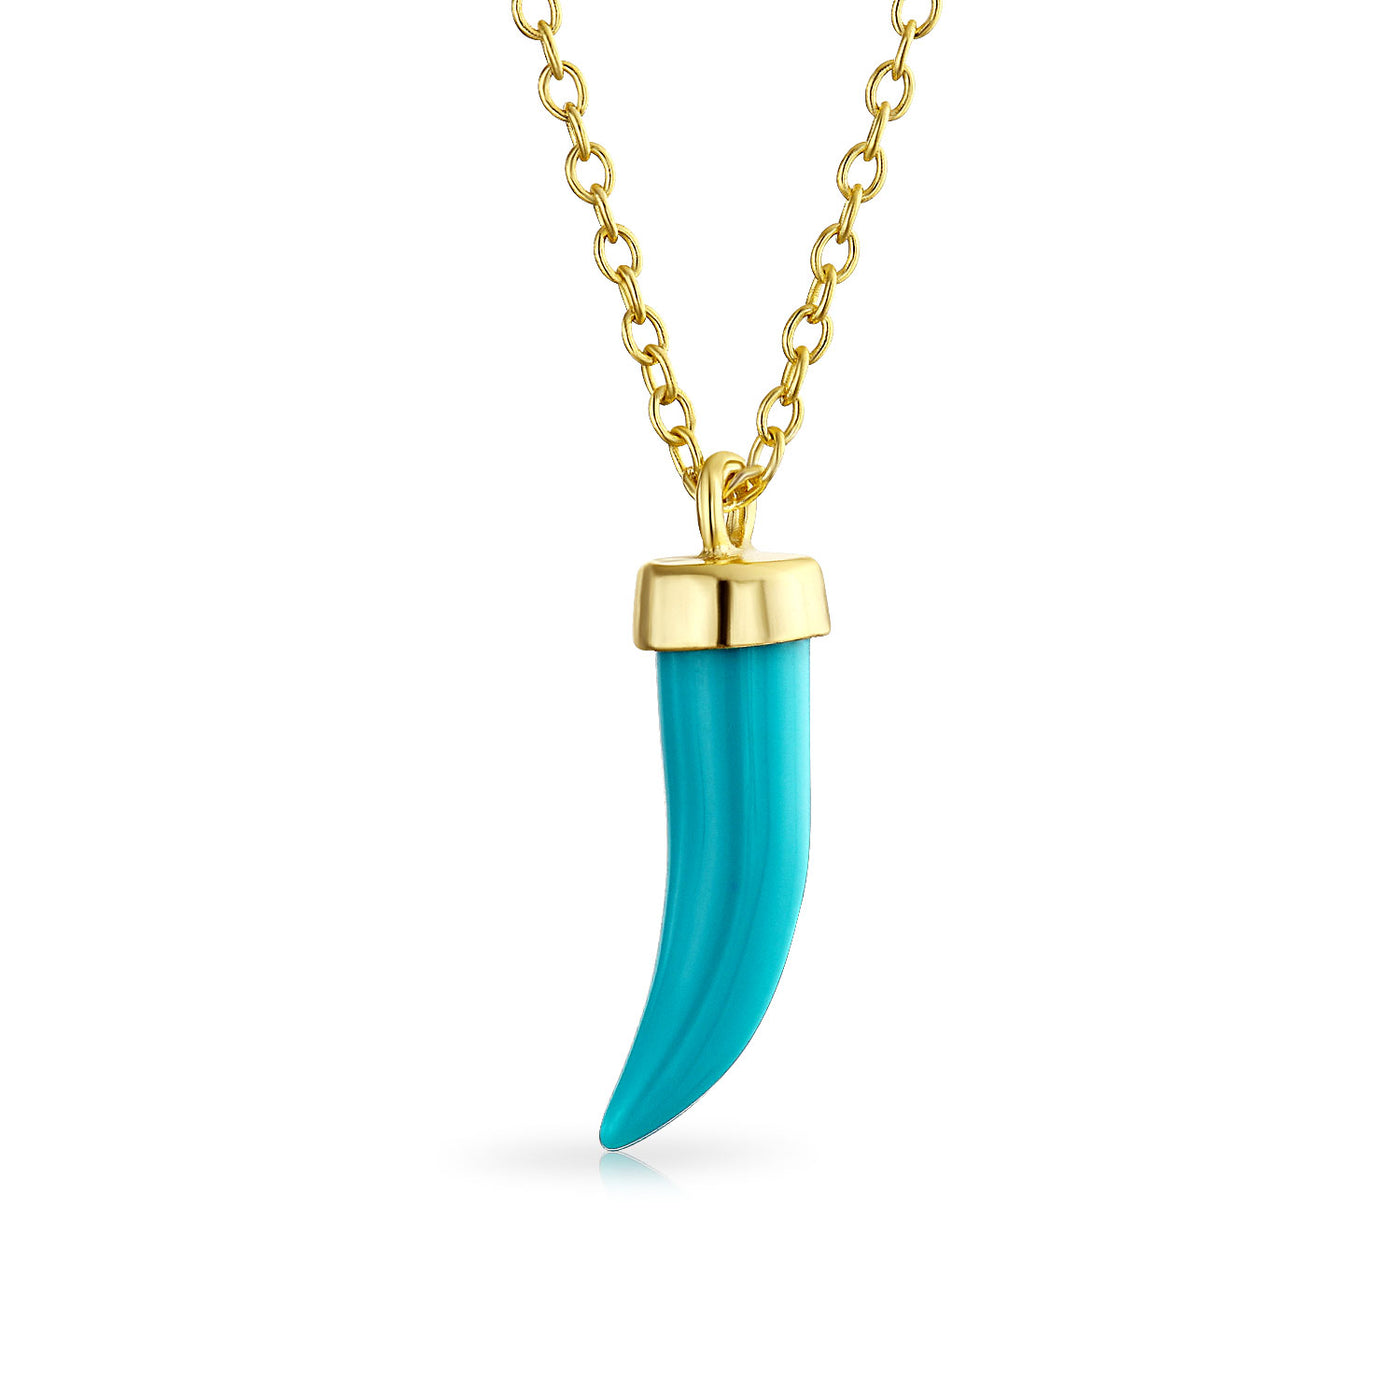 Horn Tooth Chili Pepper Pendant Turquoise Gold Plated Western Necklace